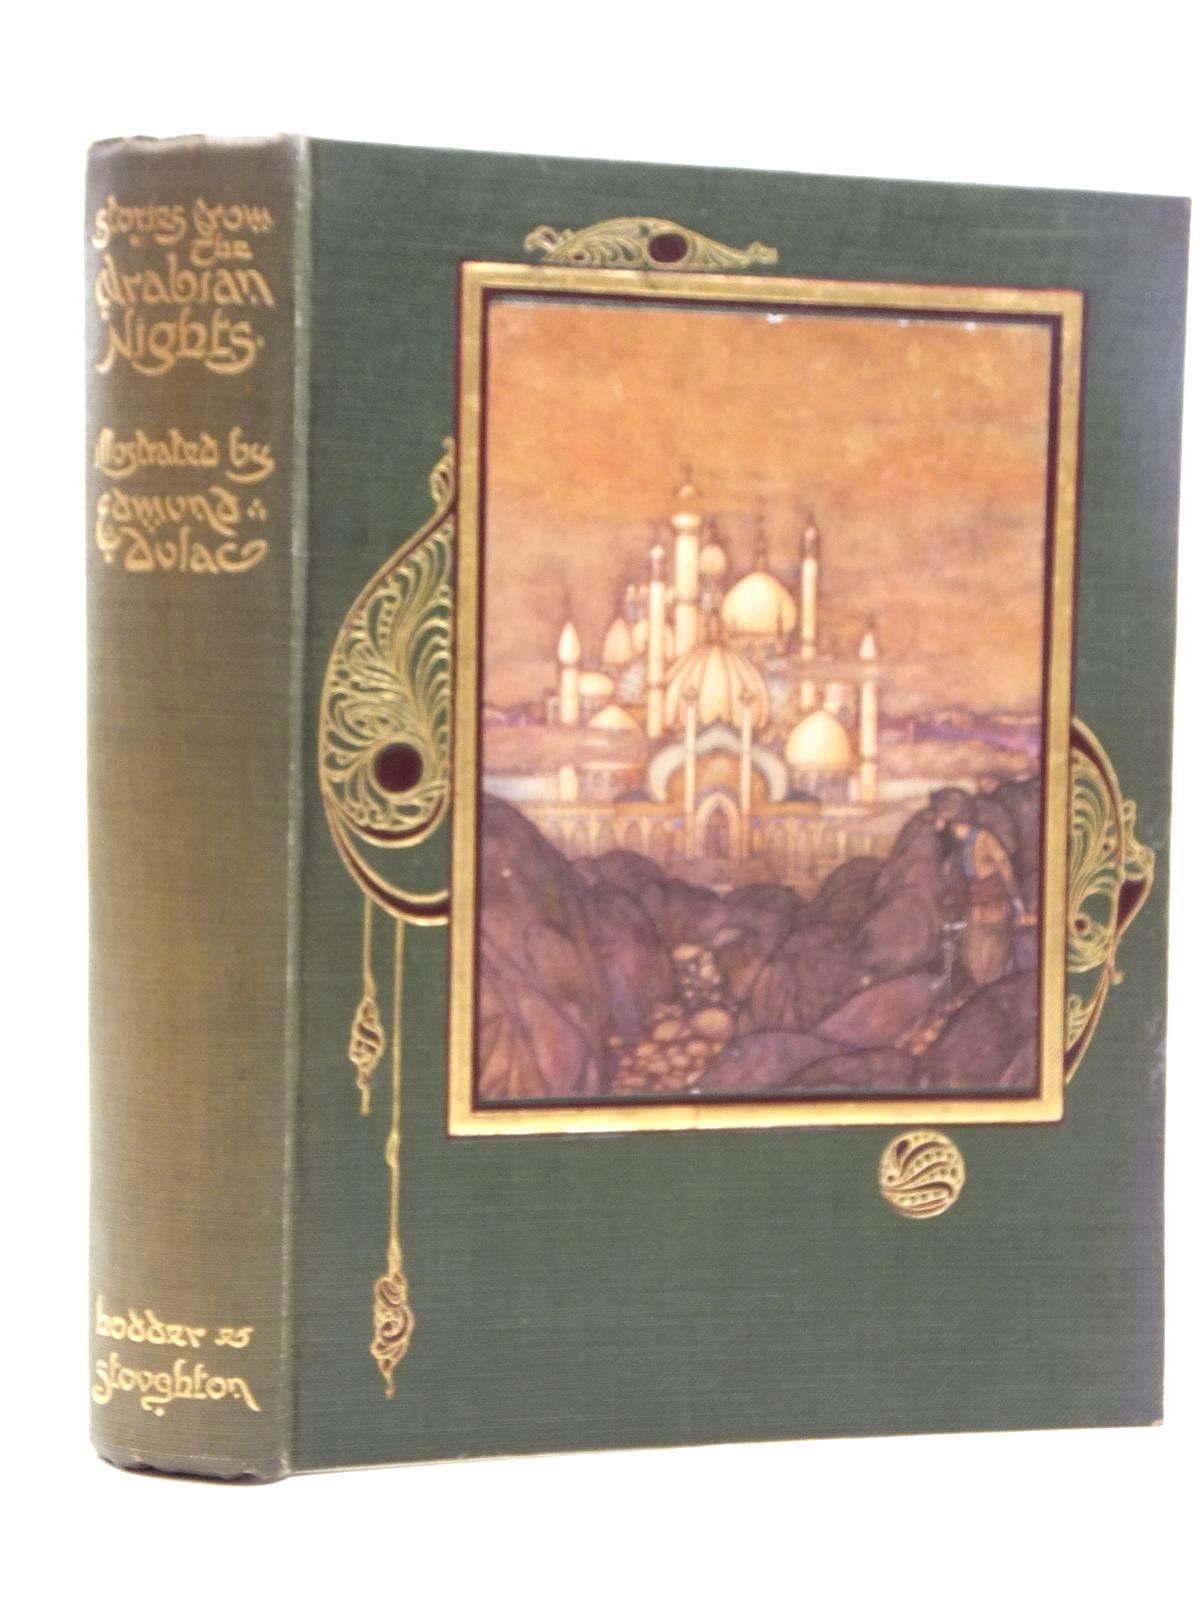 Stories From The Arabian Nights